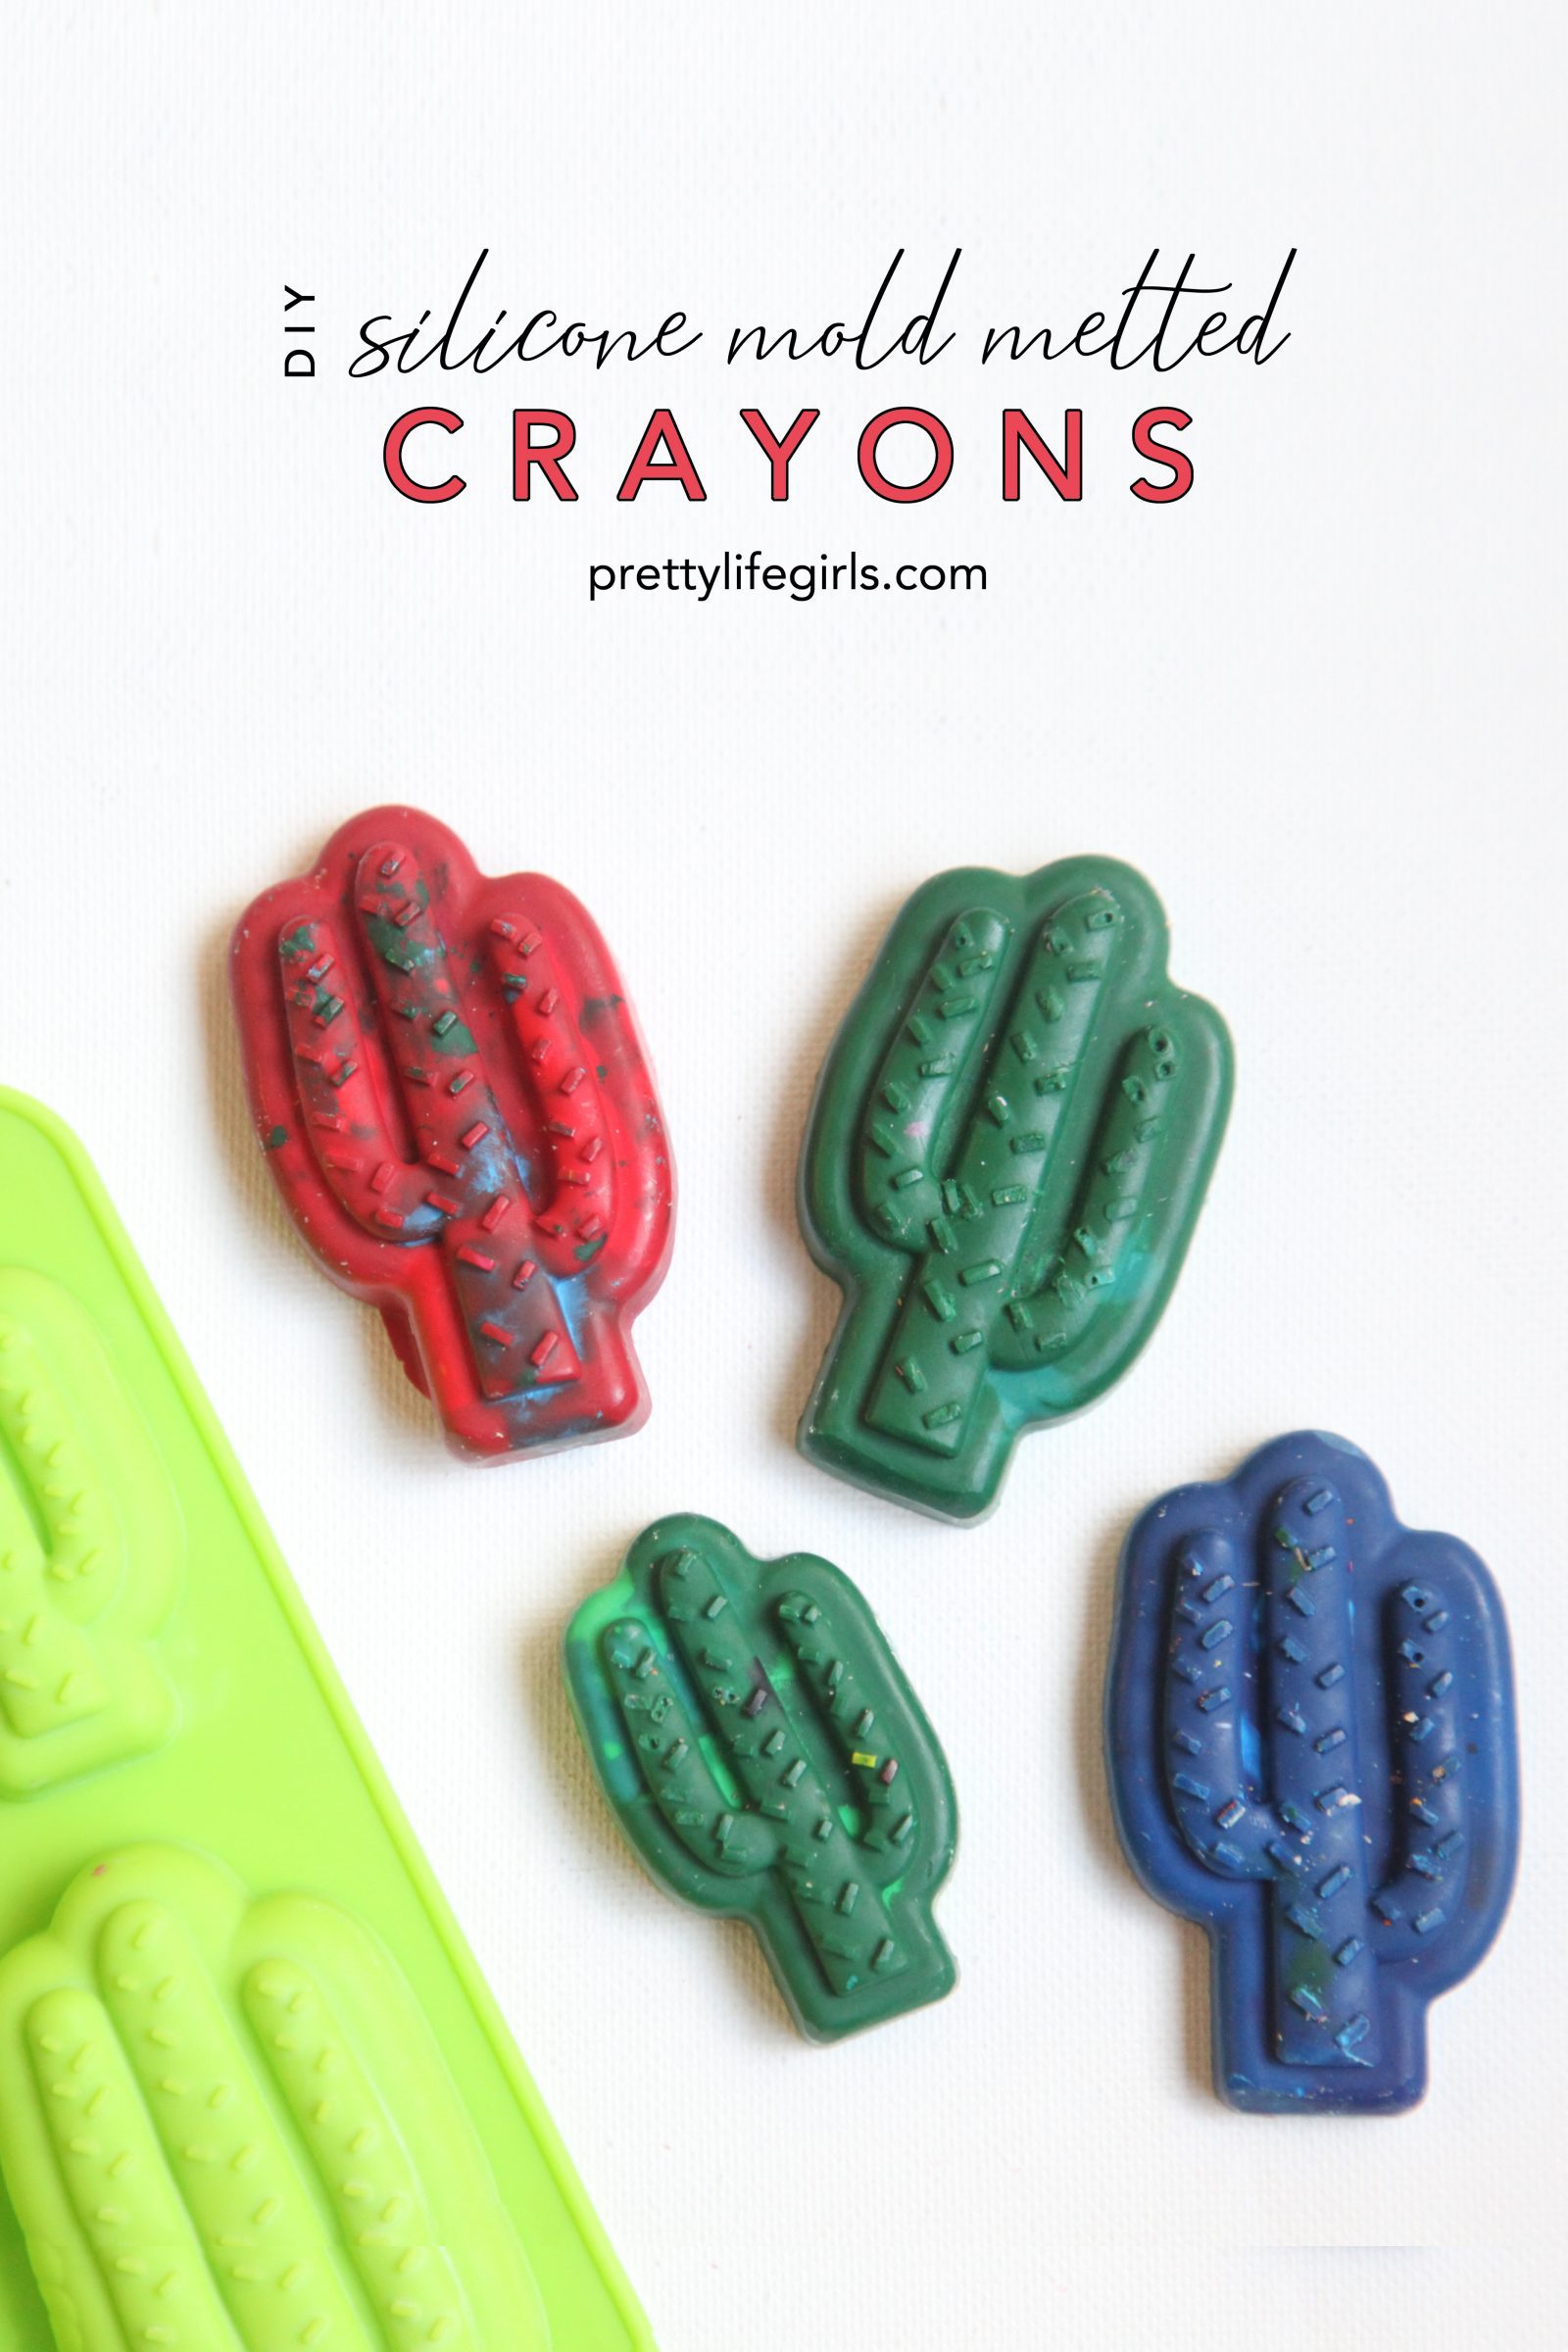 How to Melt Crayons in Silicone Molds: A Step by Step Craft Tutorial